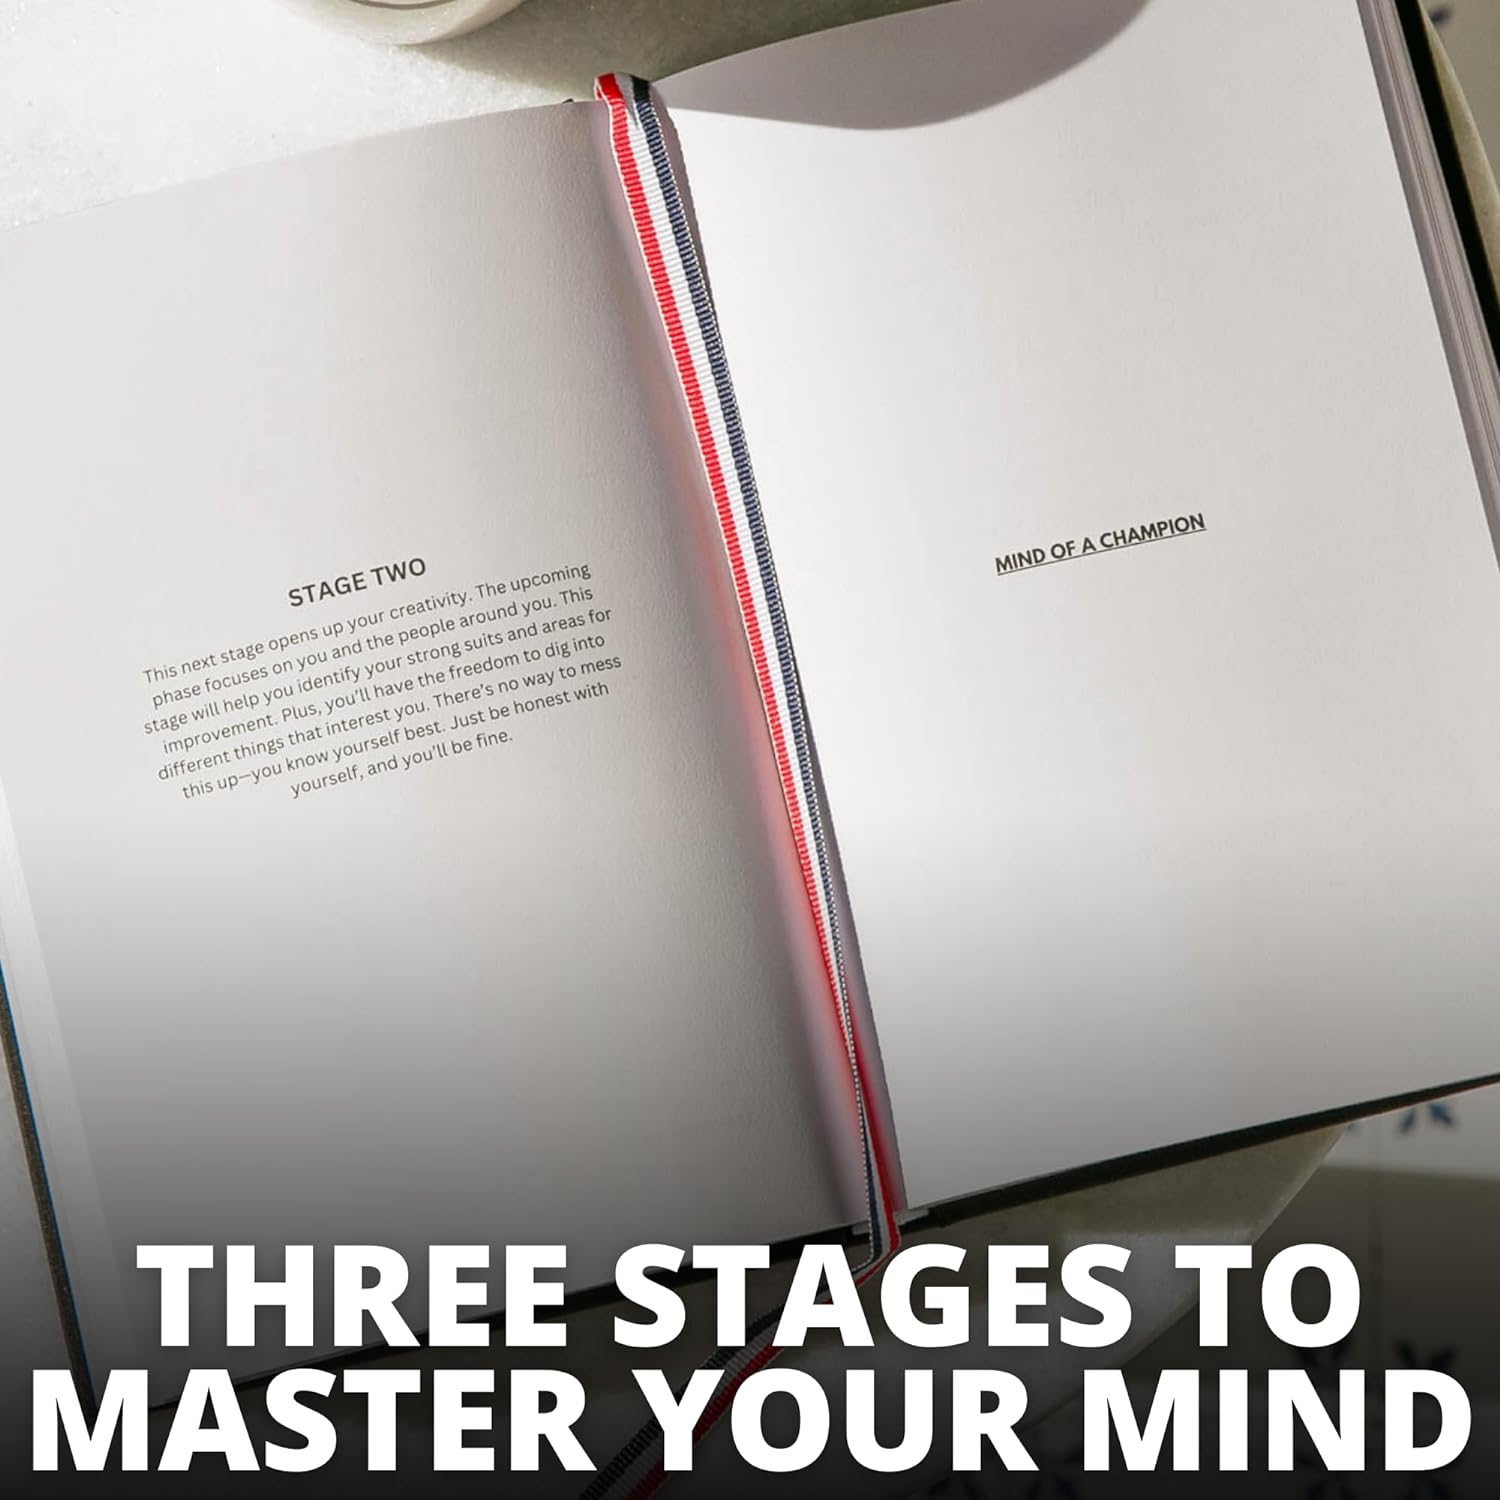 Mind of a Champion - Self-Mastery & Mindfulness Journal for Men